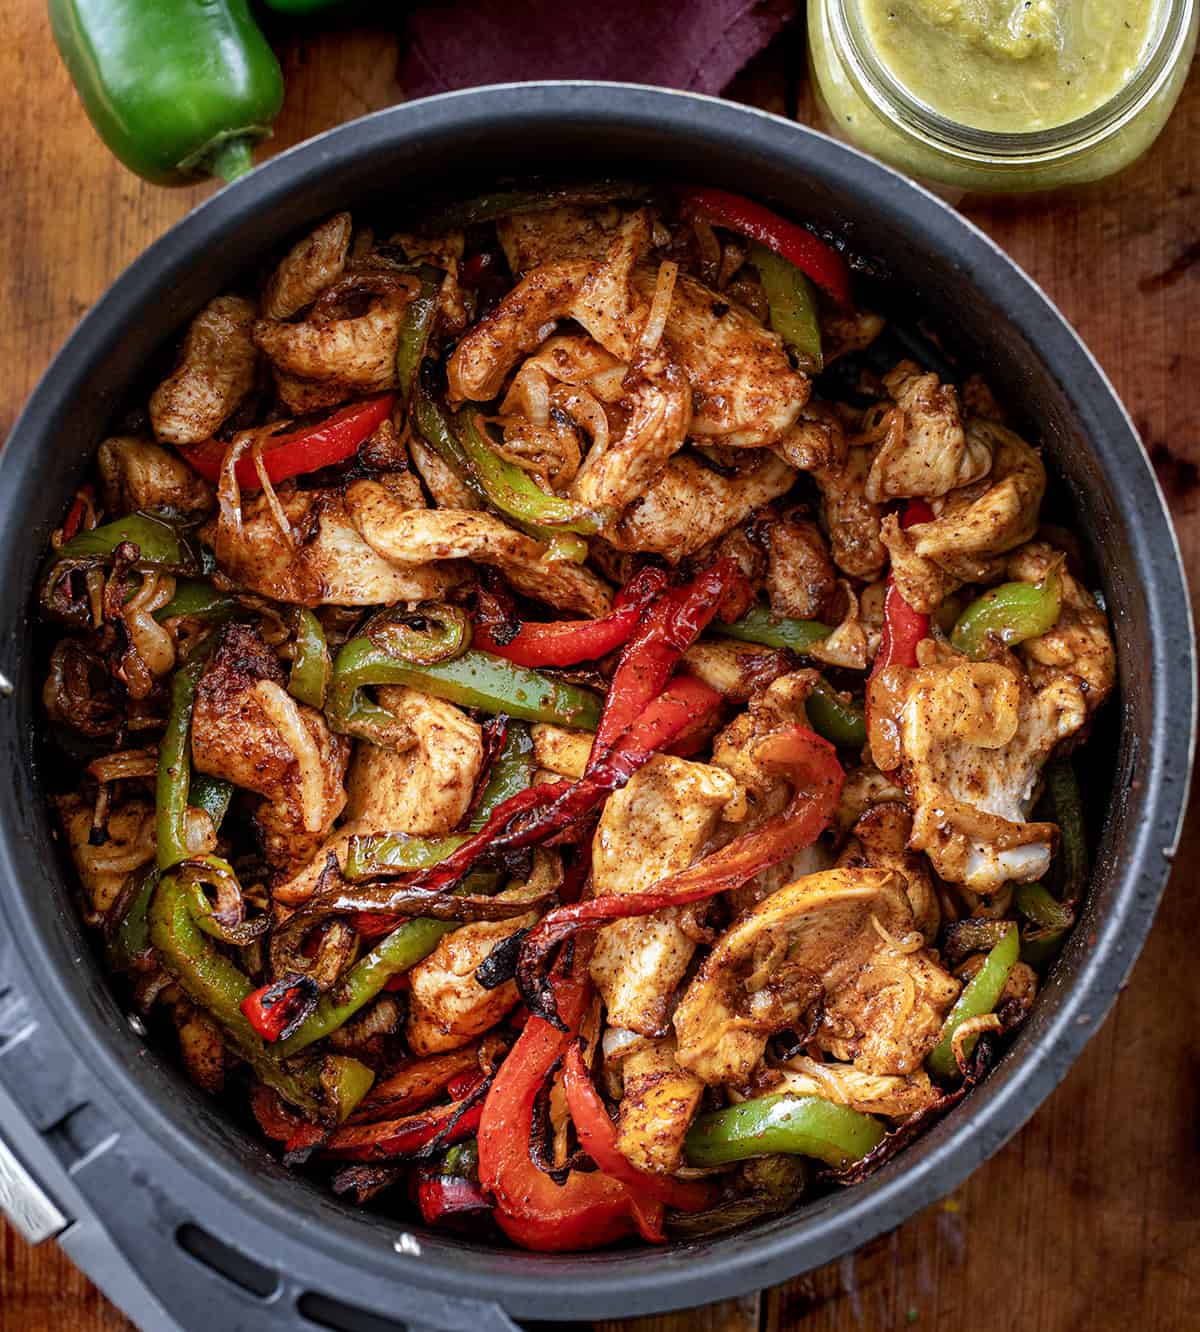 Air Fryer Chicken Fajitas in the air fryer on a wooden table from overhead.